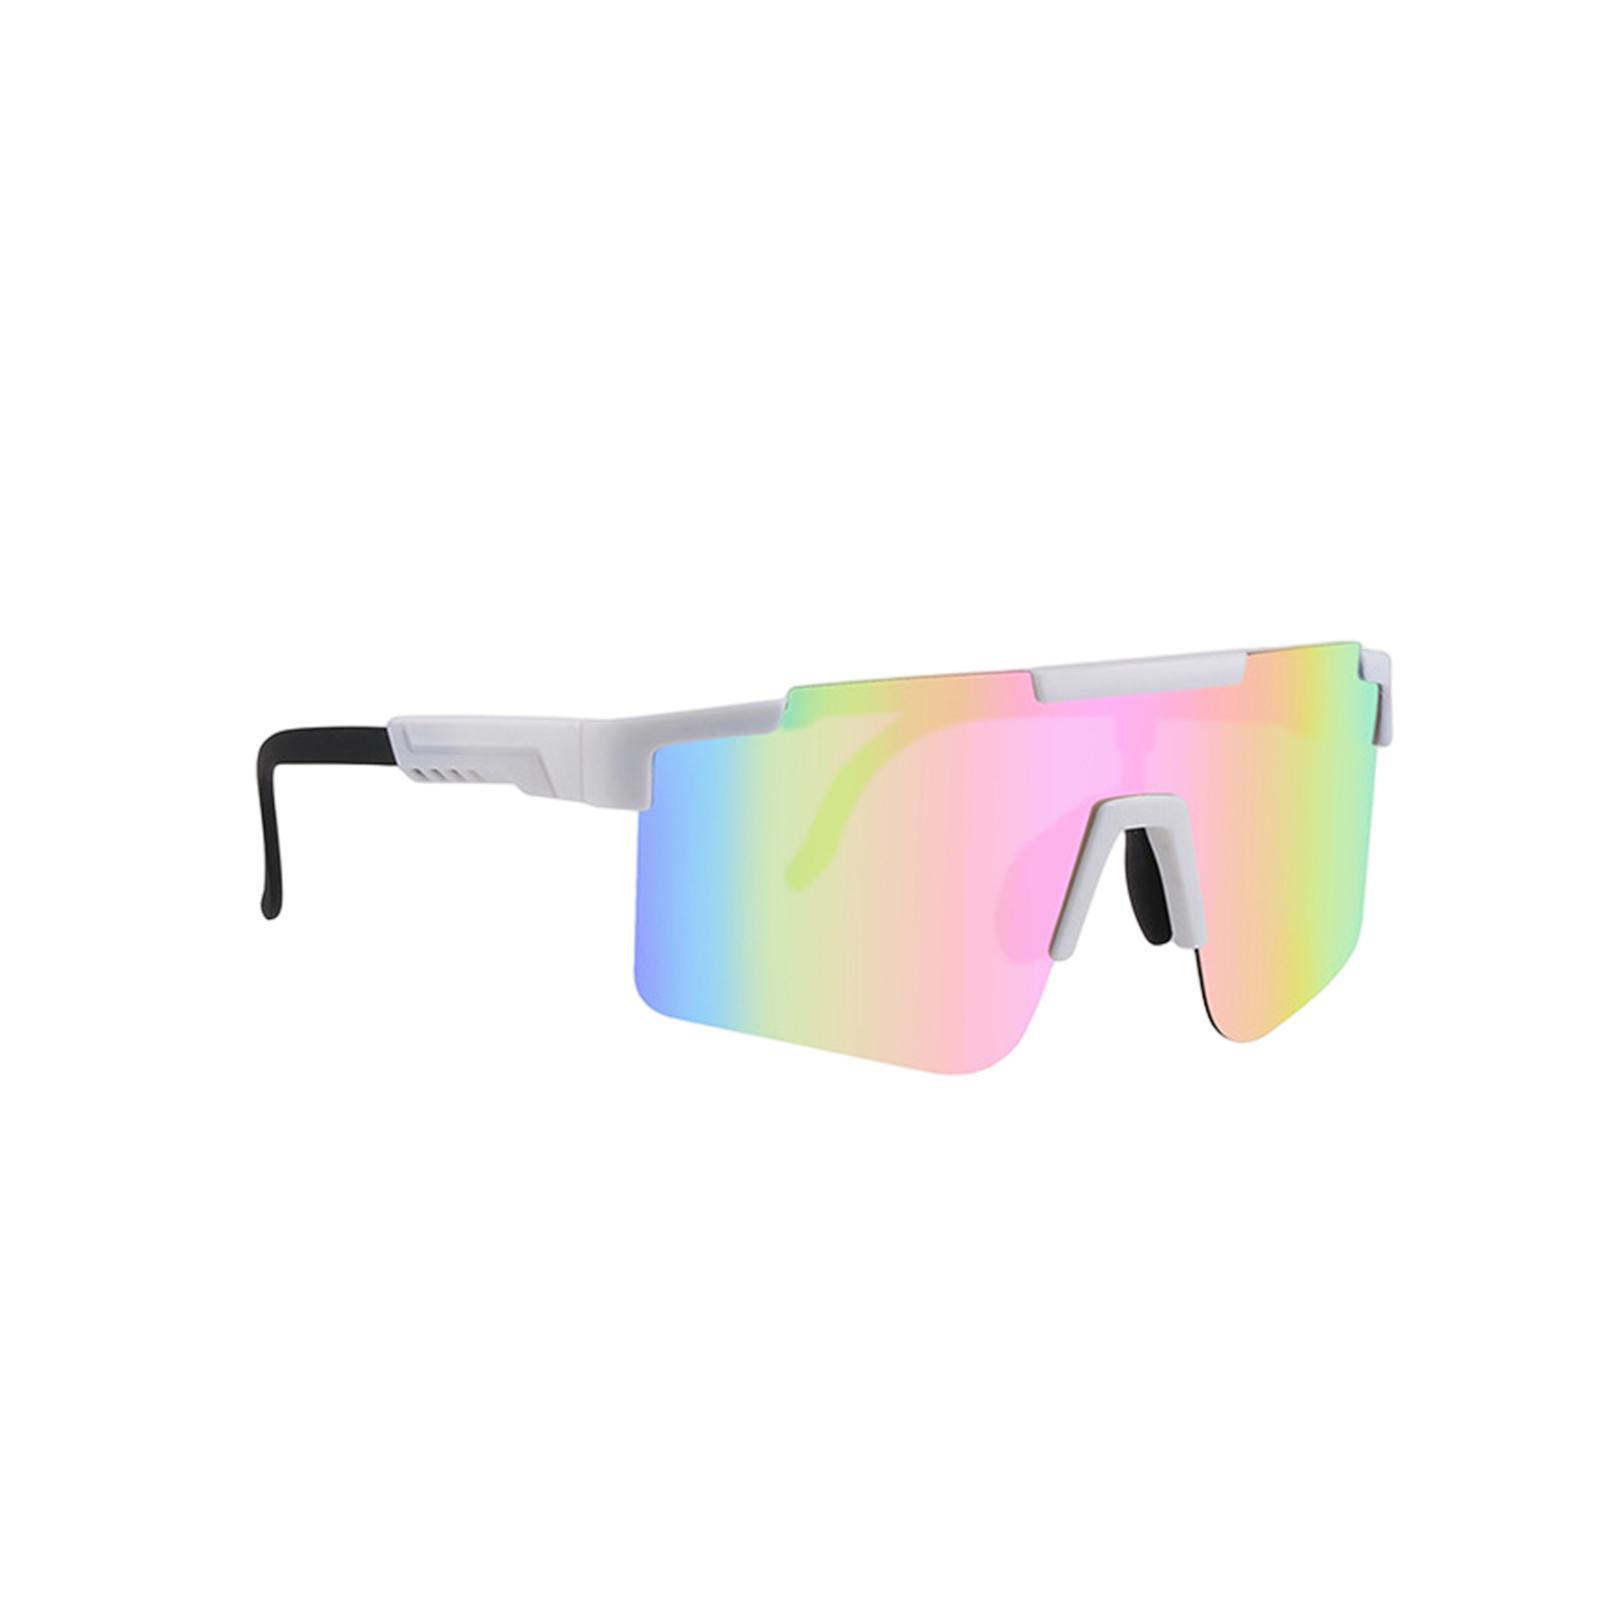 Polarized Sunglasses for Men and Women Cycling Sunglasses for Running Biking